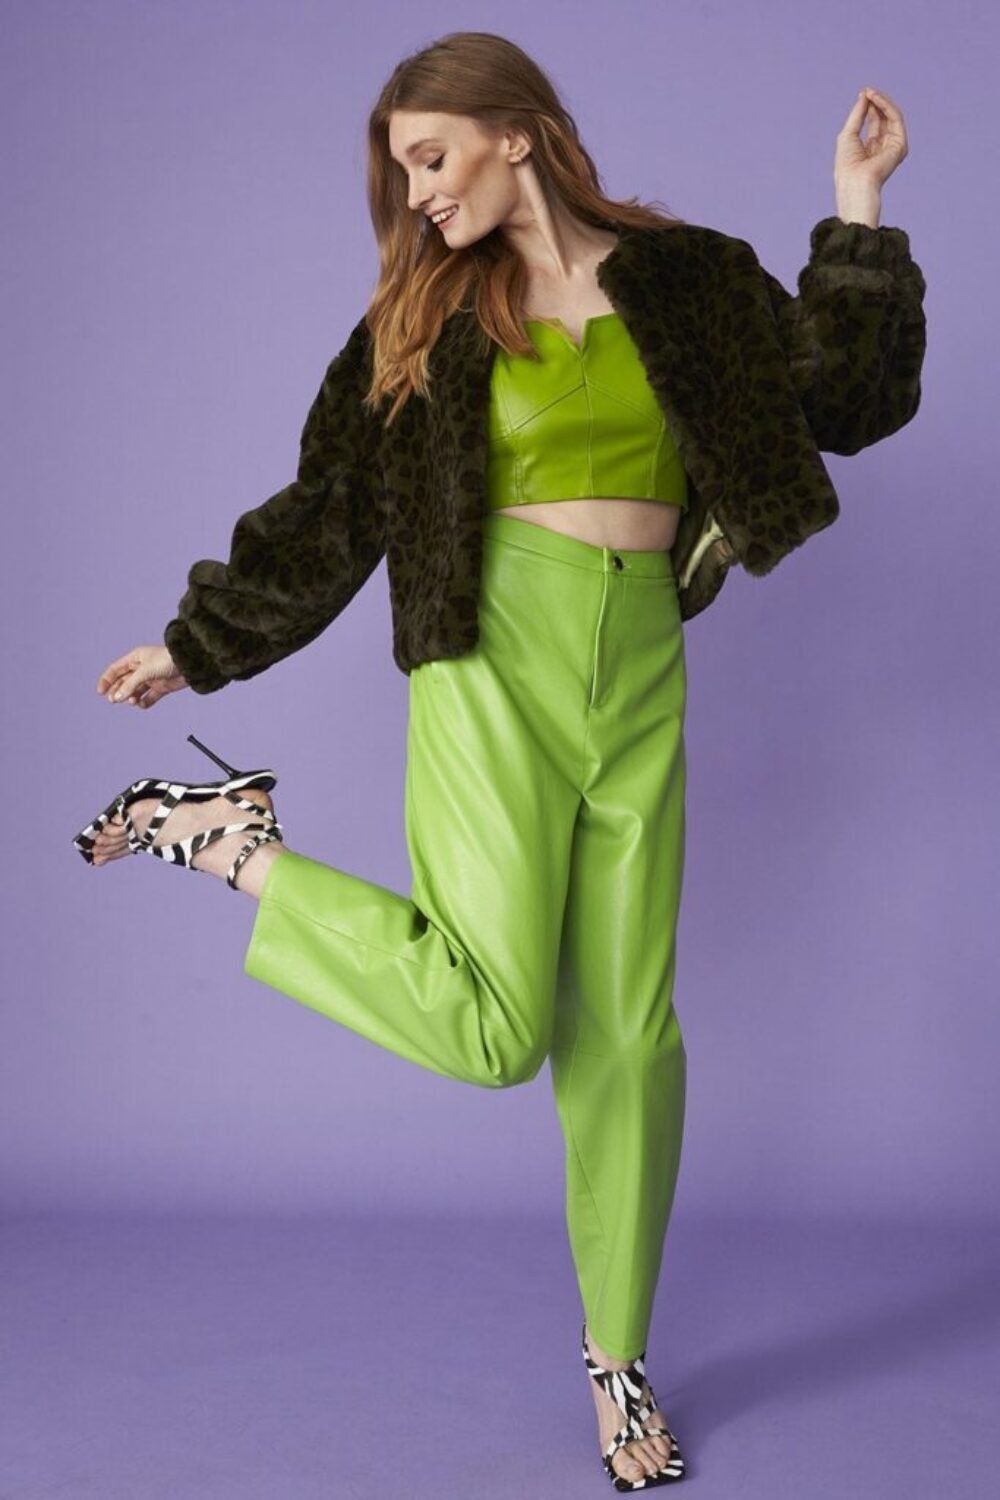 Shop Lux Green Cropped Faux Fur Jacket and women's luxury and designer clothes at www.lux-apparel.co.uk